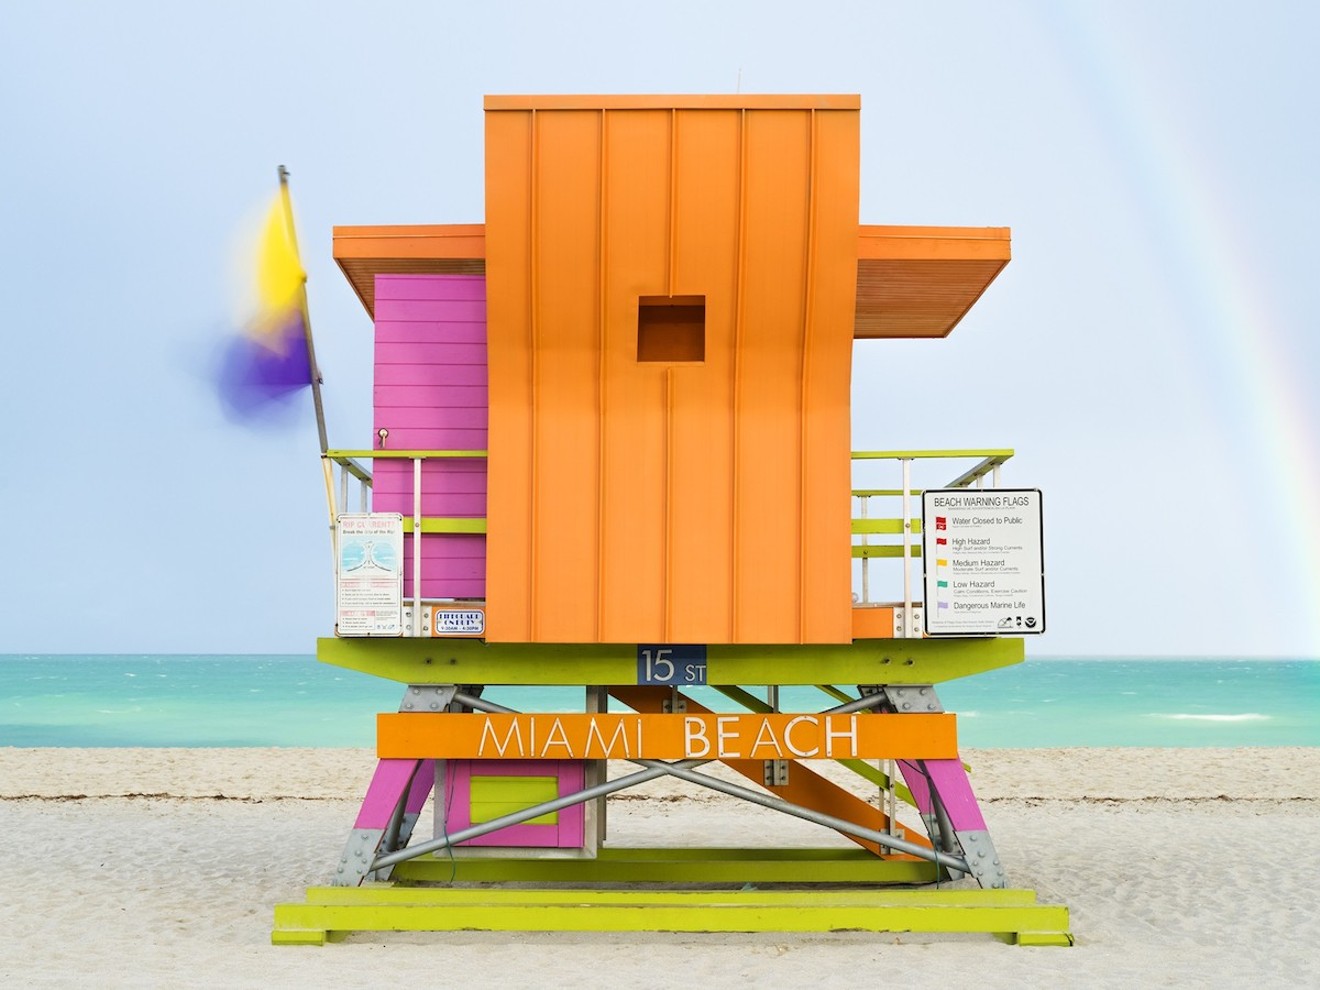 Miami Beach's iconic lifeguard towers are the subject of photographer Tommy Kwak's latest photo book.